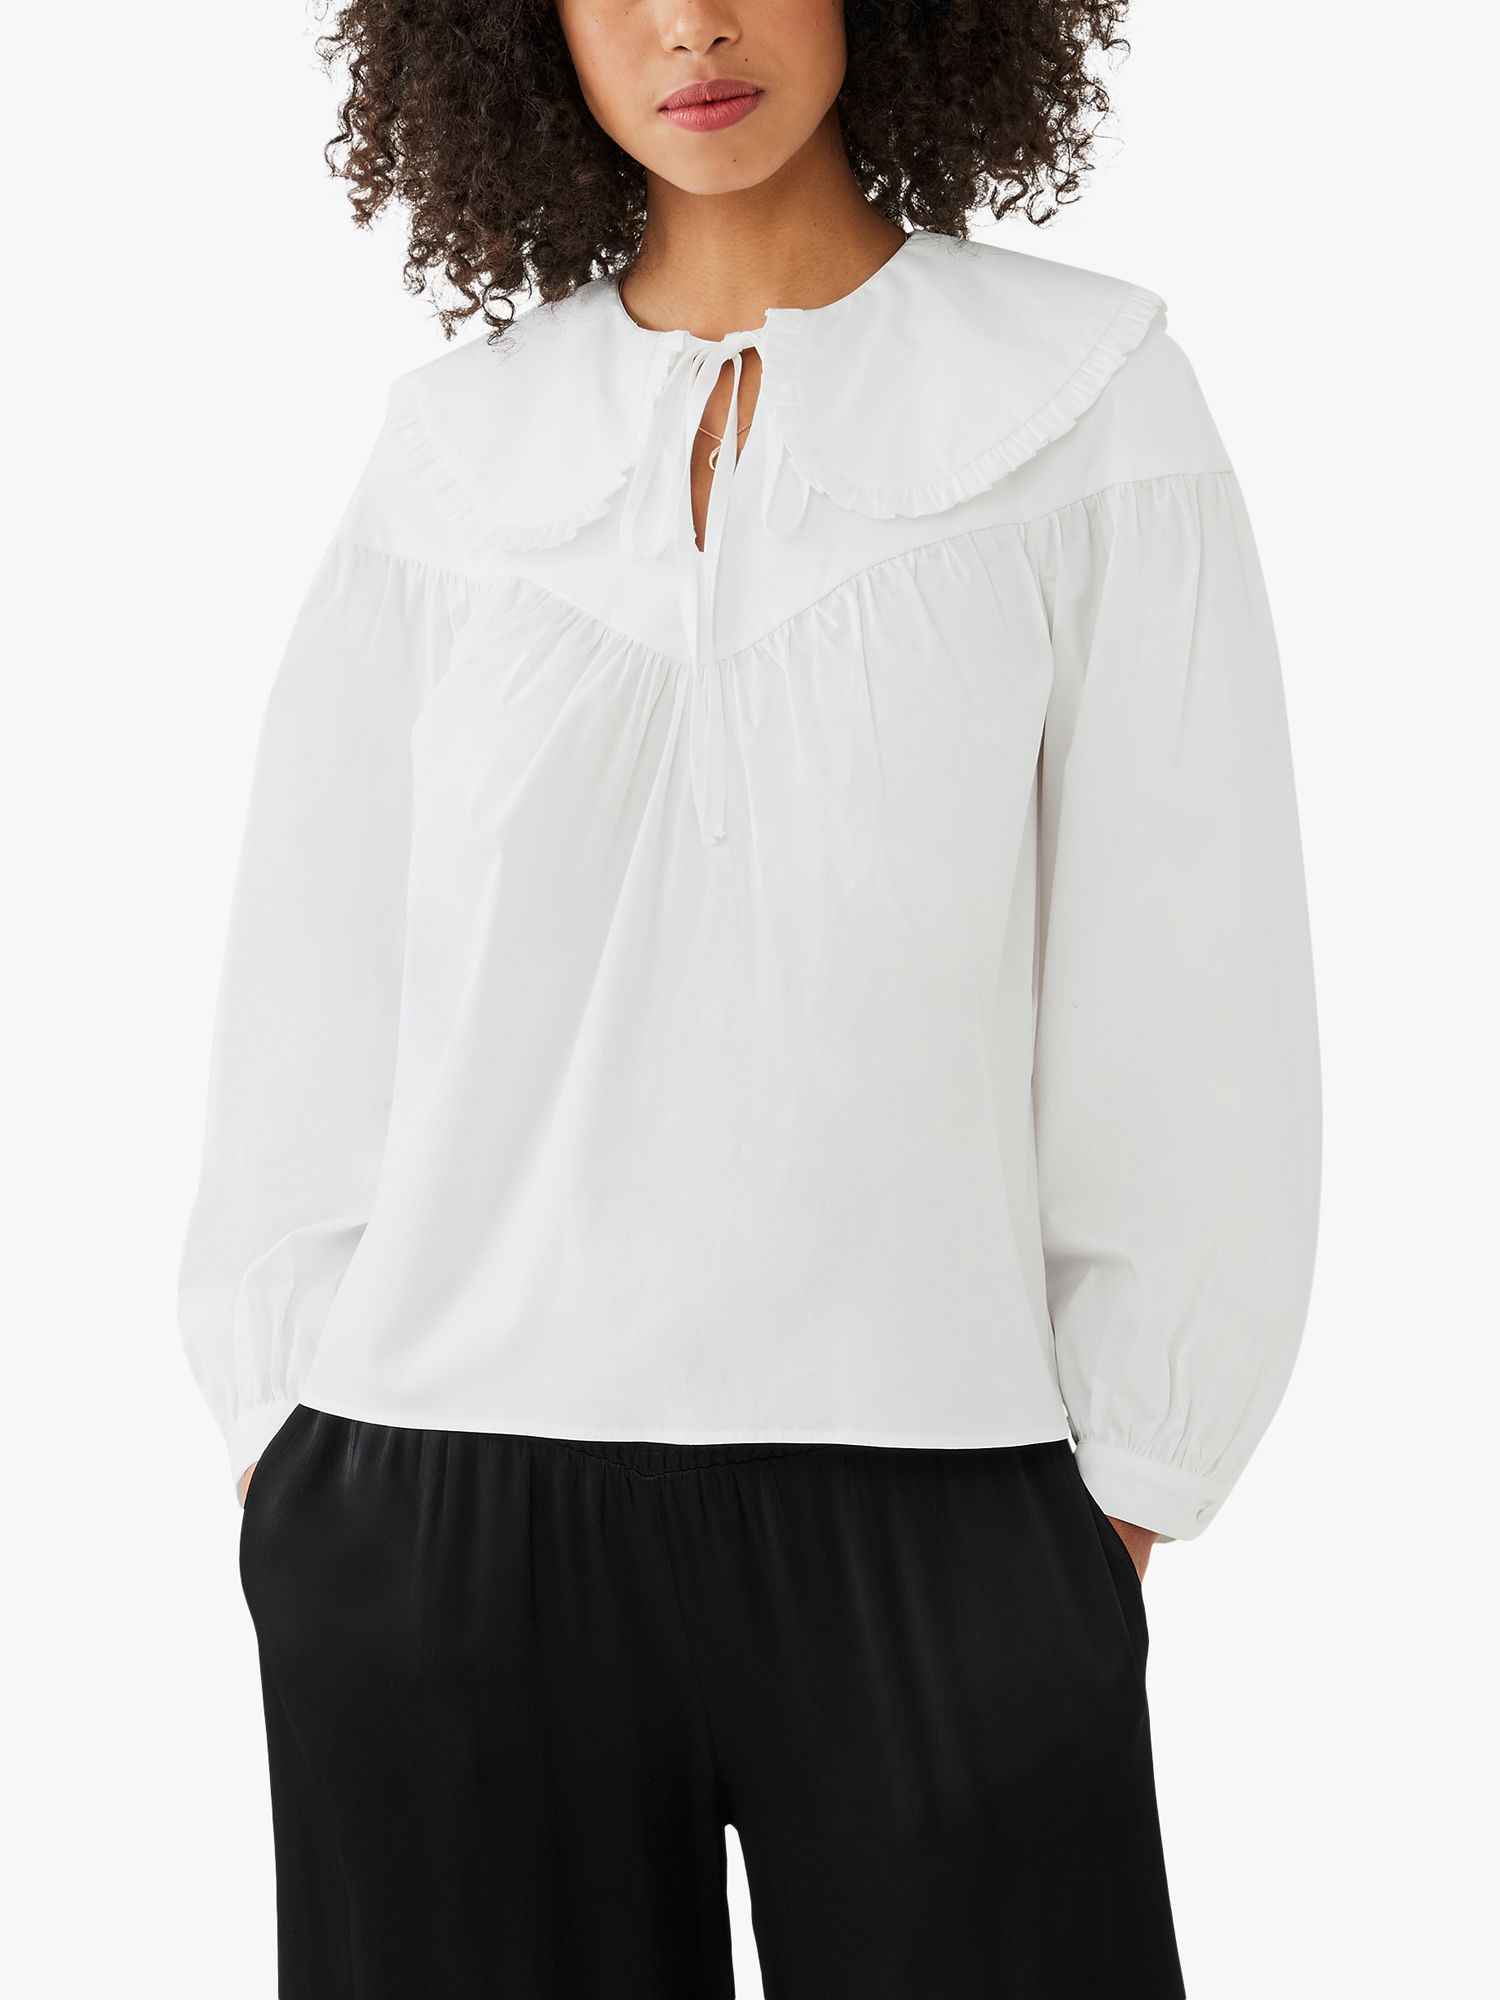 Ghost Daisy Peter Pan Collar Blouse, White